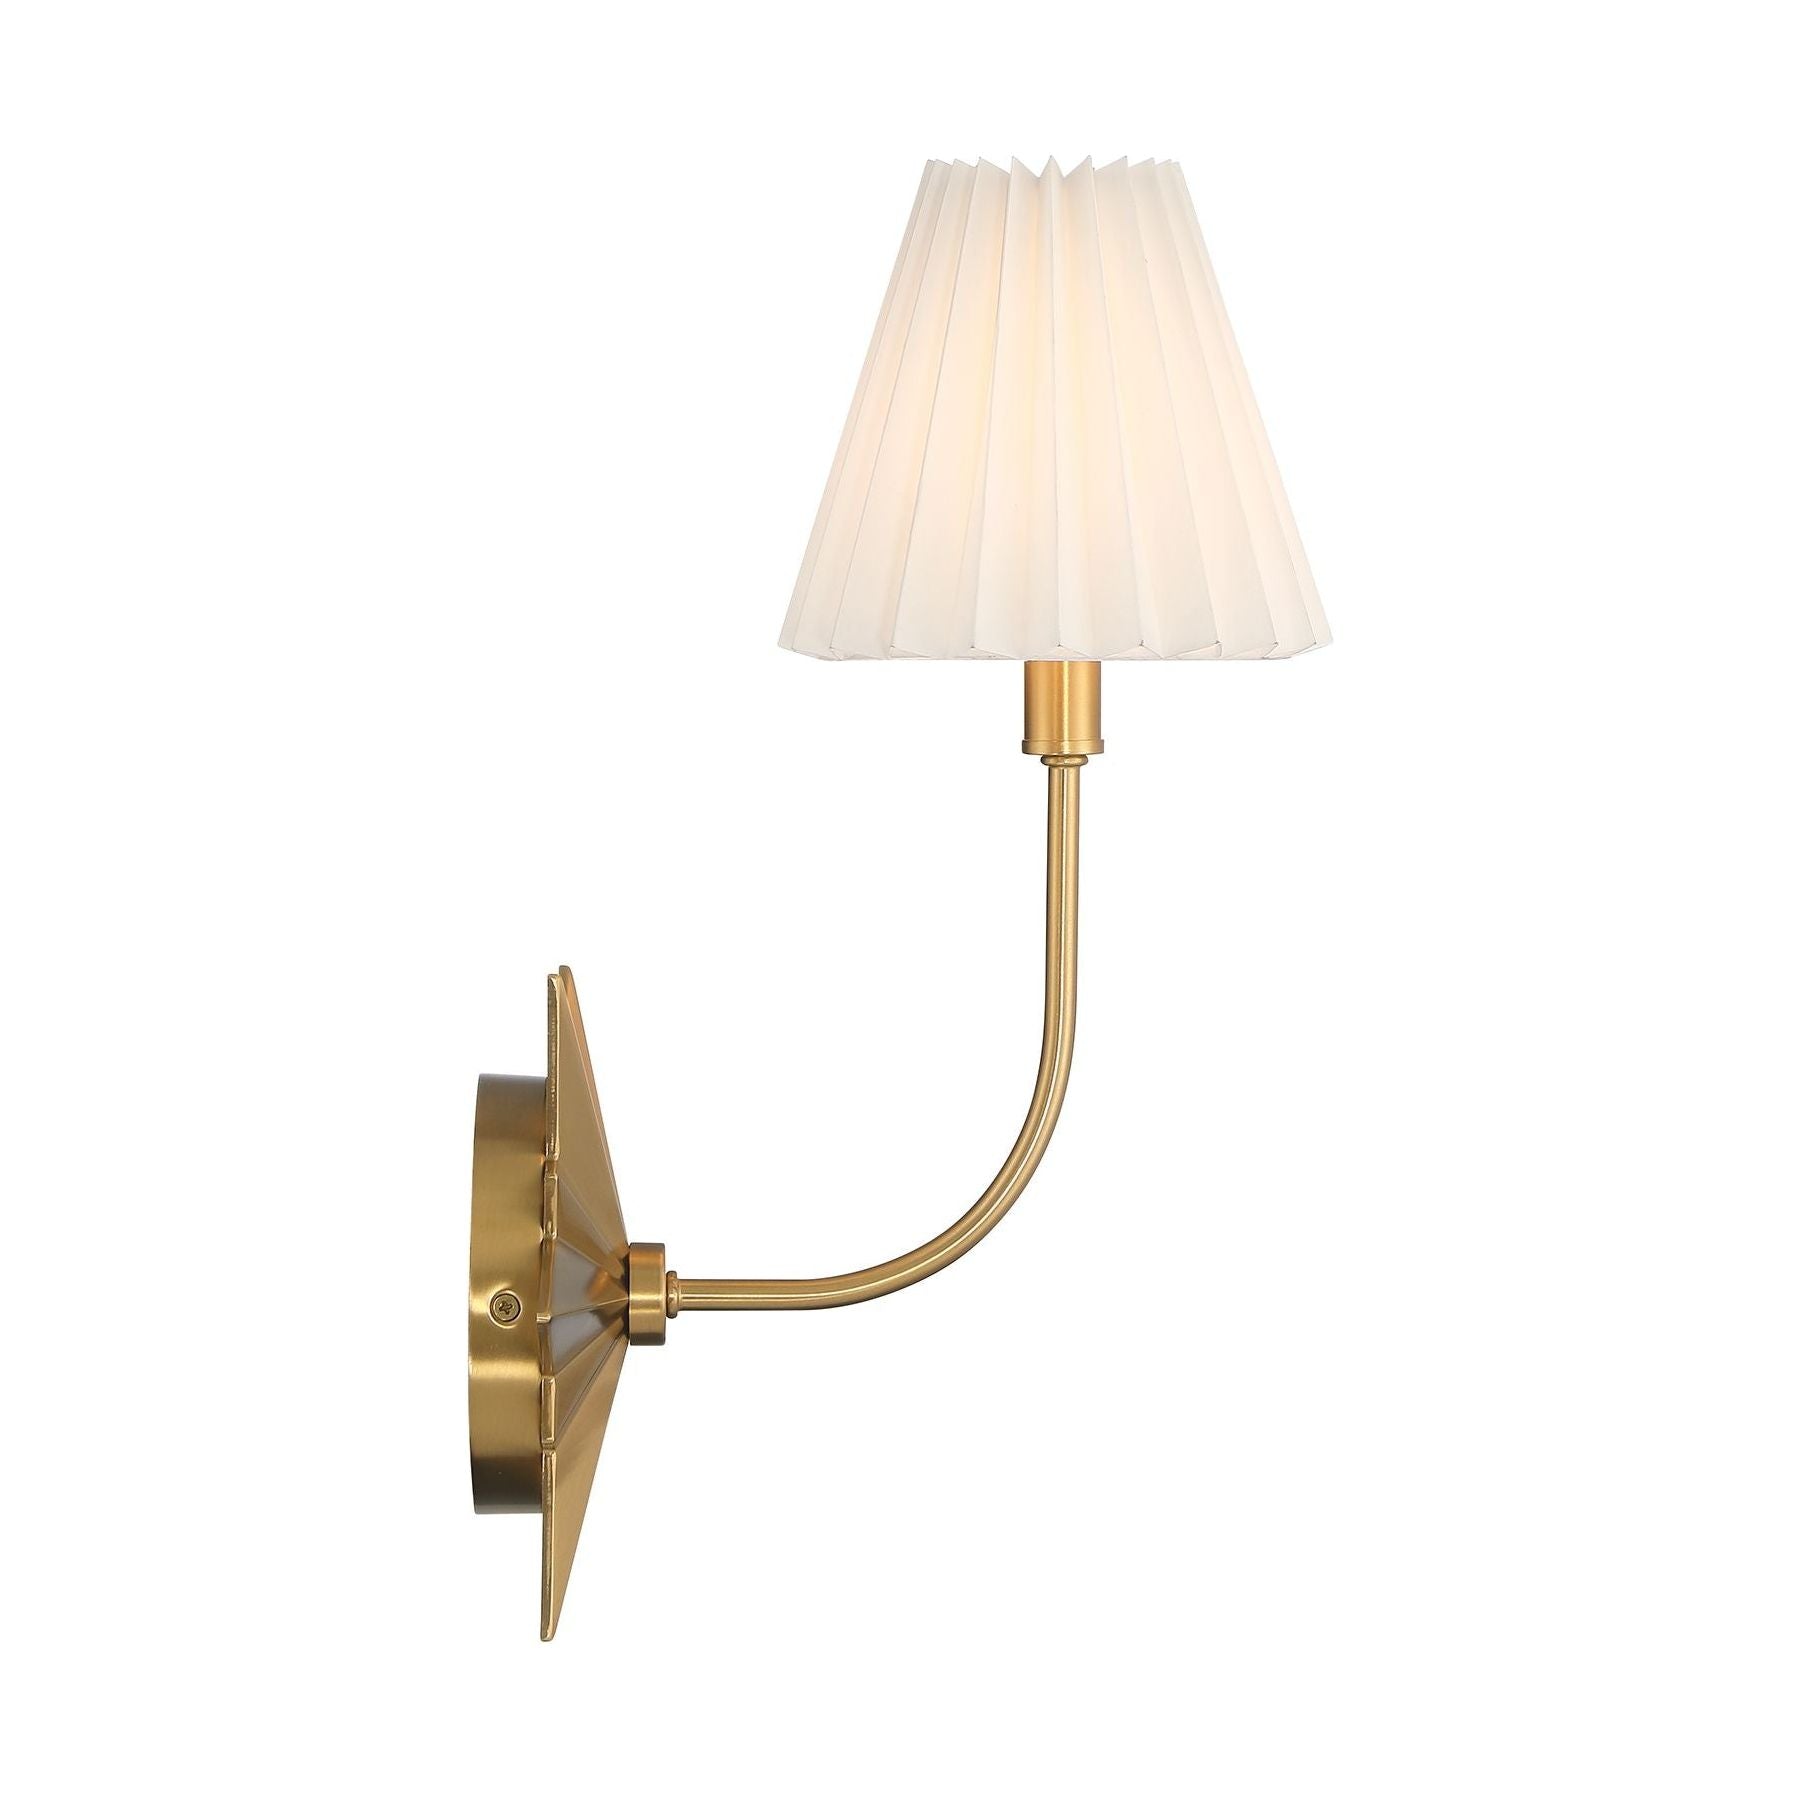 Crestwood 1-Light Wall Sconce